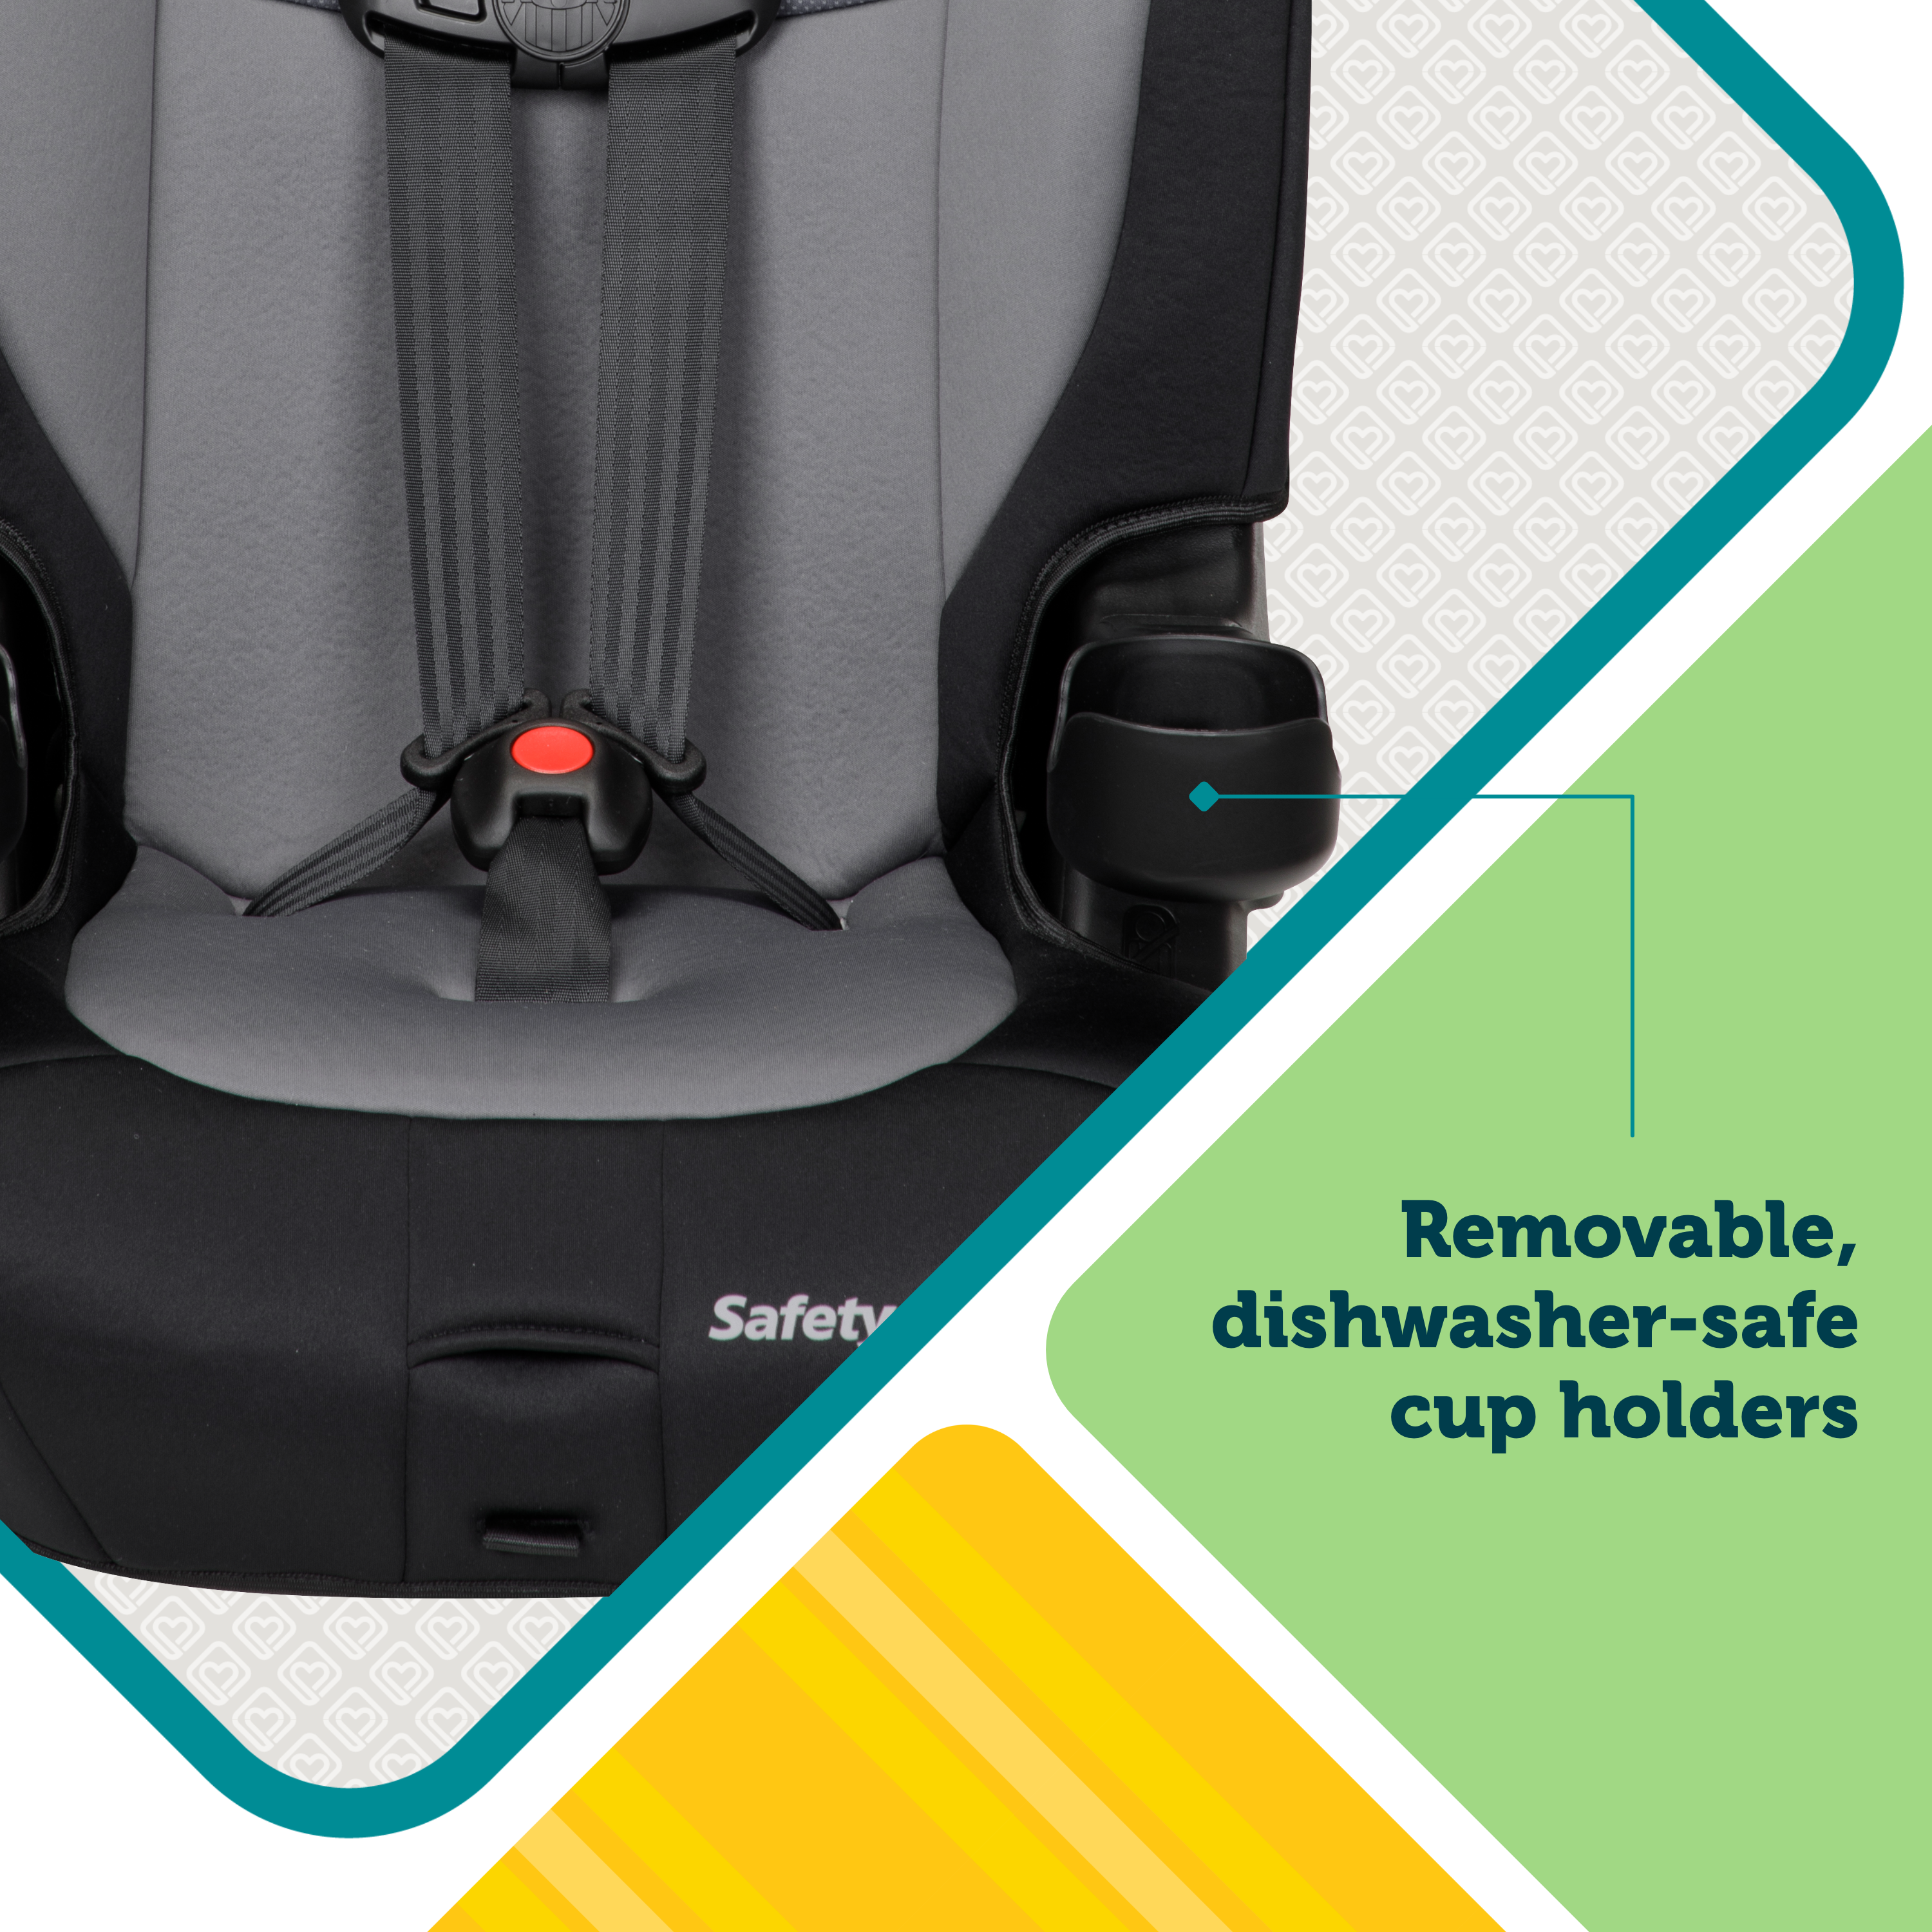 Grand 2-in-1 Booster Car Seat - removable, dishwasher-safe cup holders